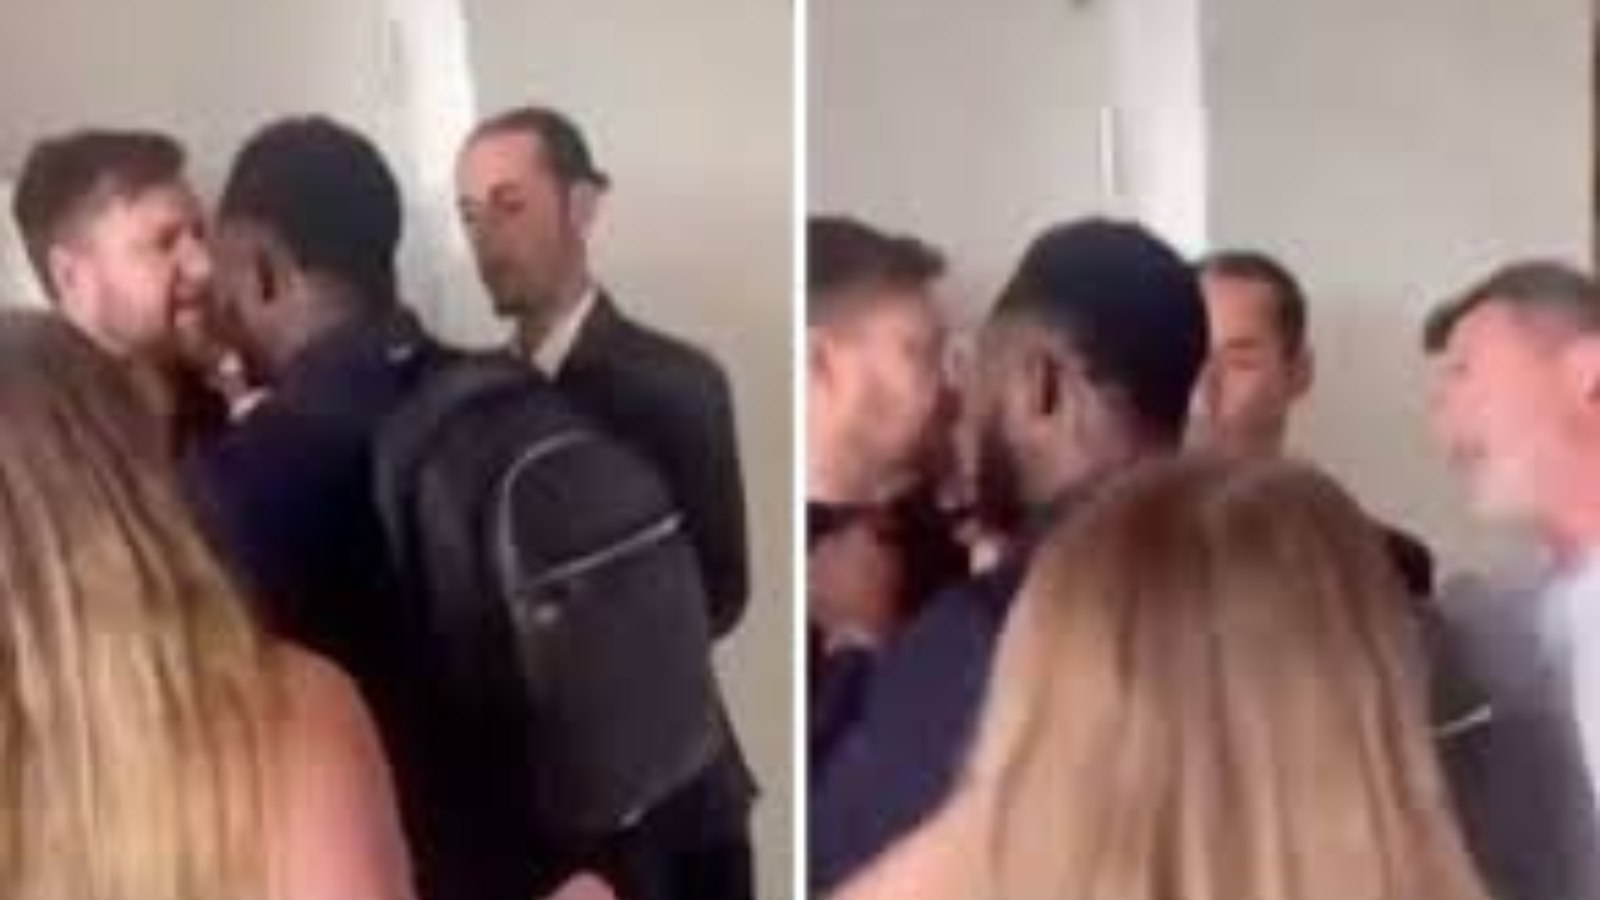 Micah Richards and Roy Keane Fight: Will They be Suspended?